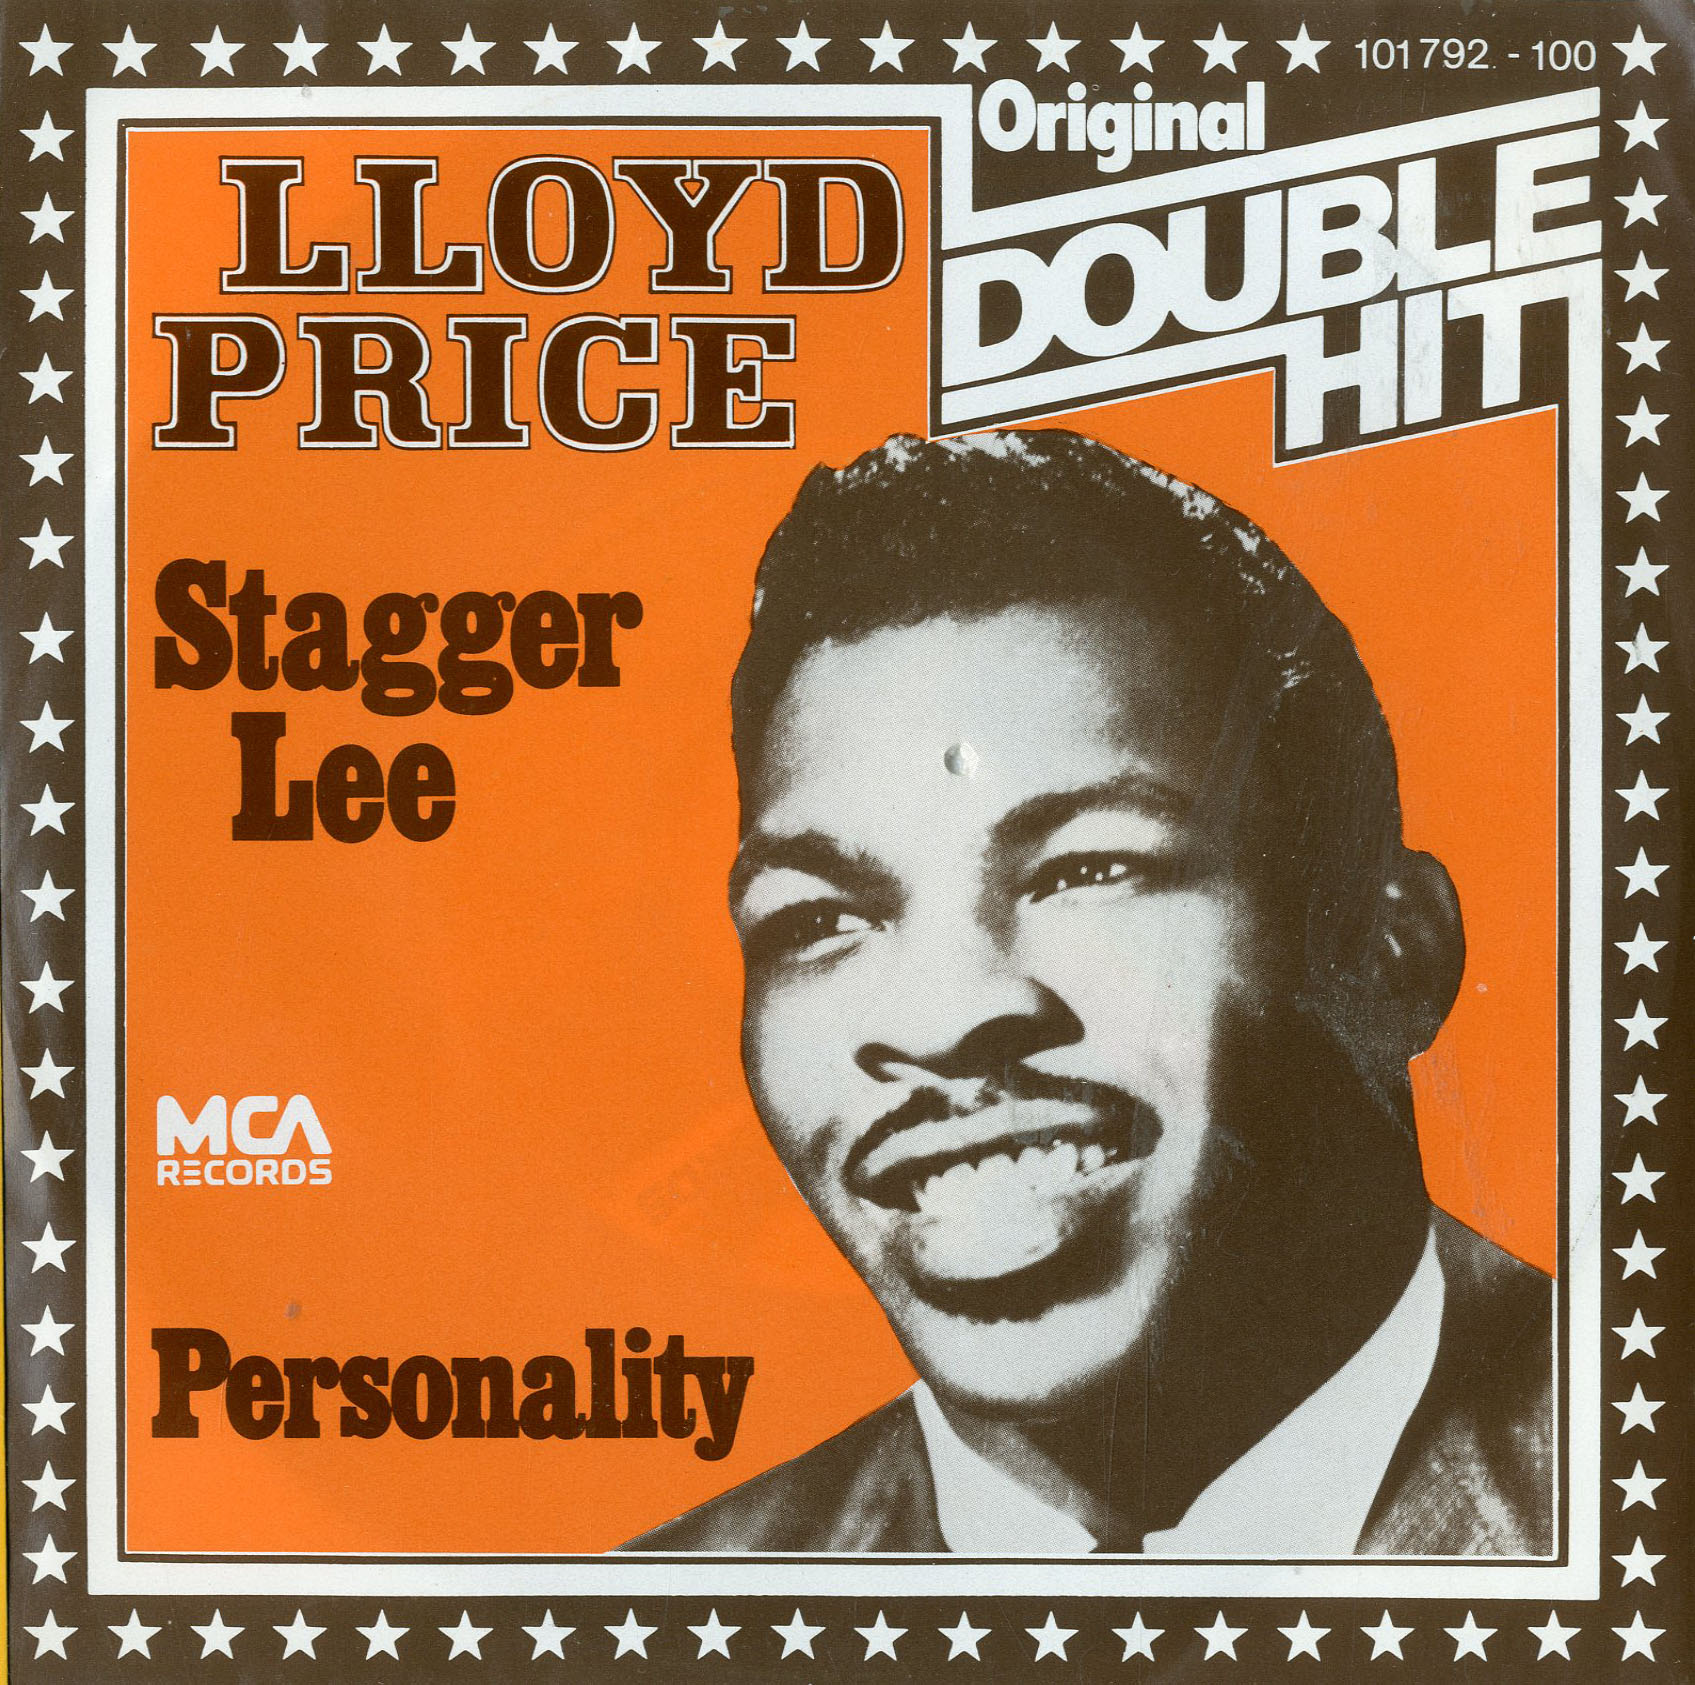 Albumcover Lloyd Price - Personality / Stagger Lee (Original Double Hit)